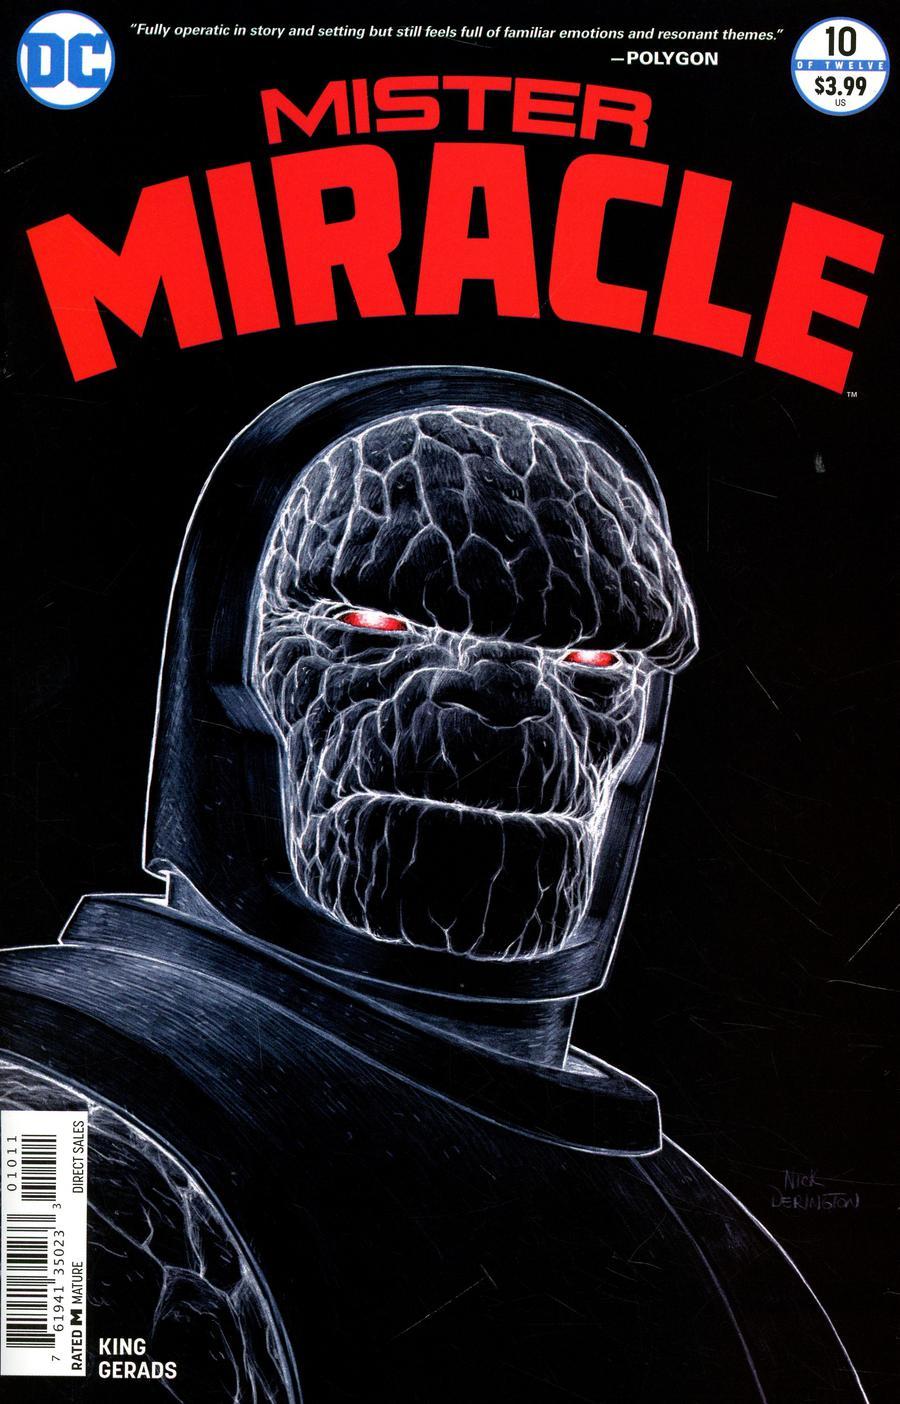 Mister Miracle Vol. 4 #10